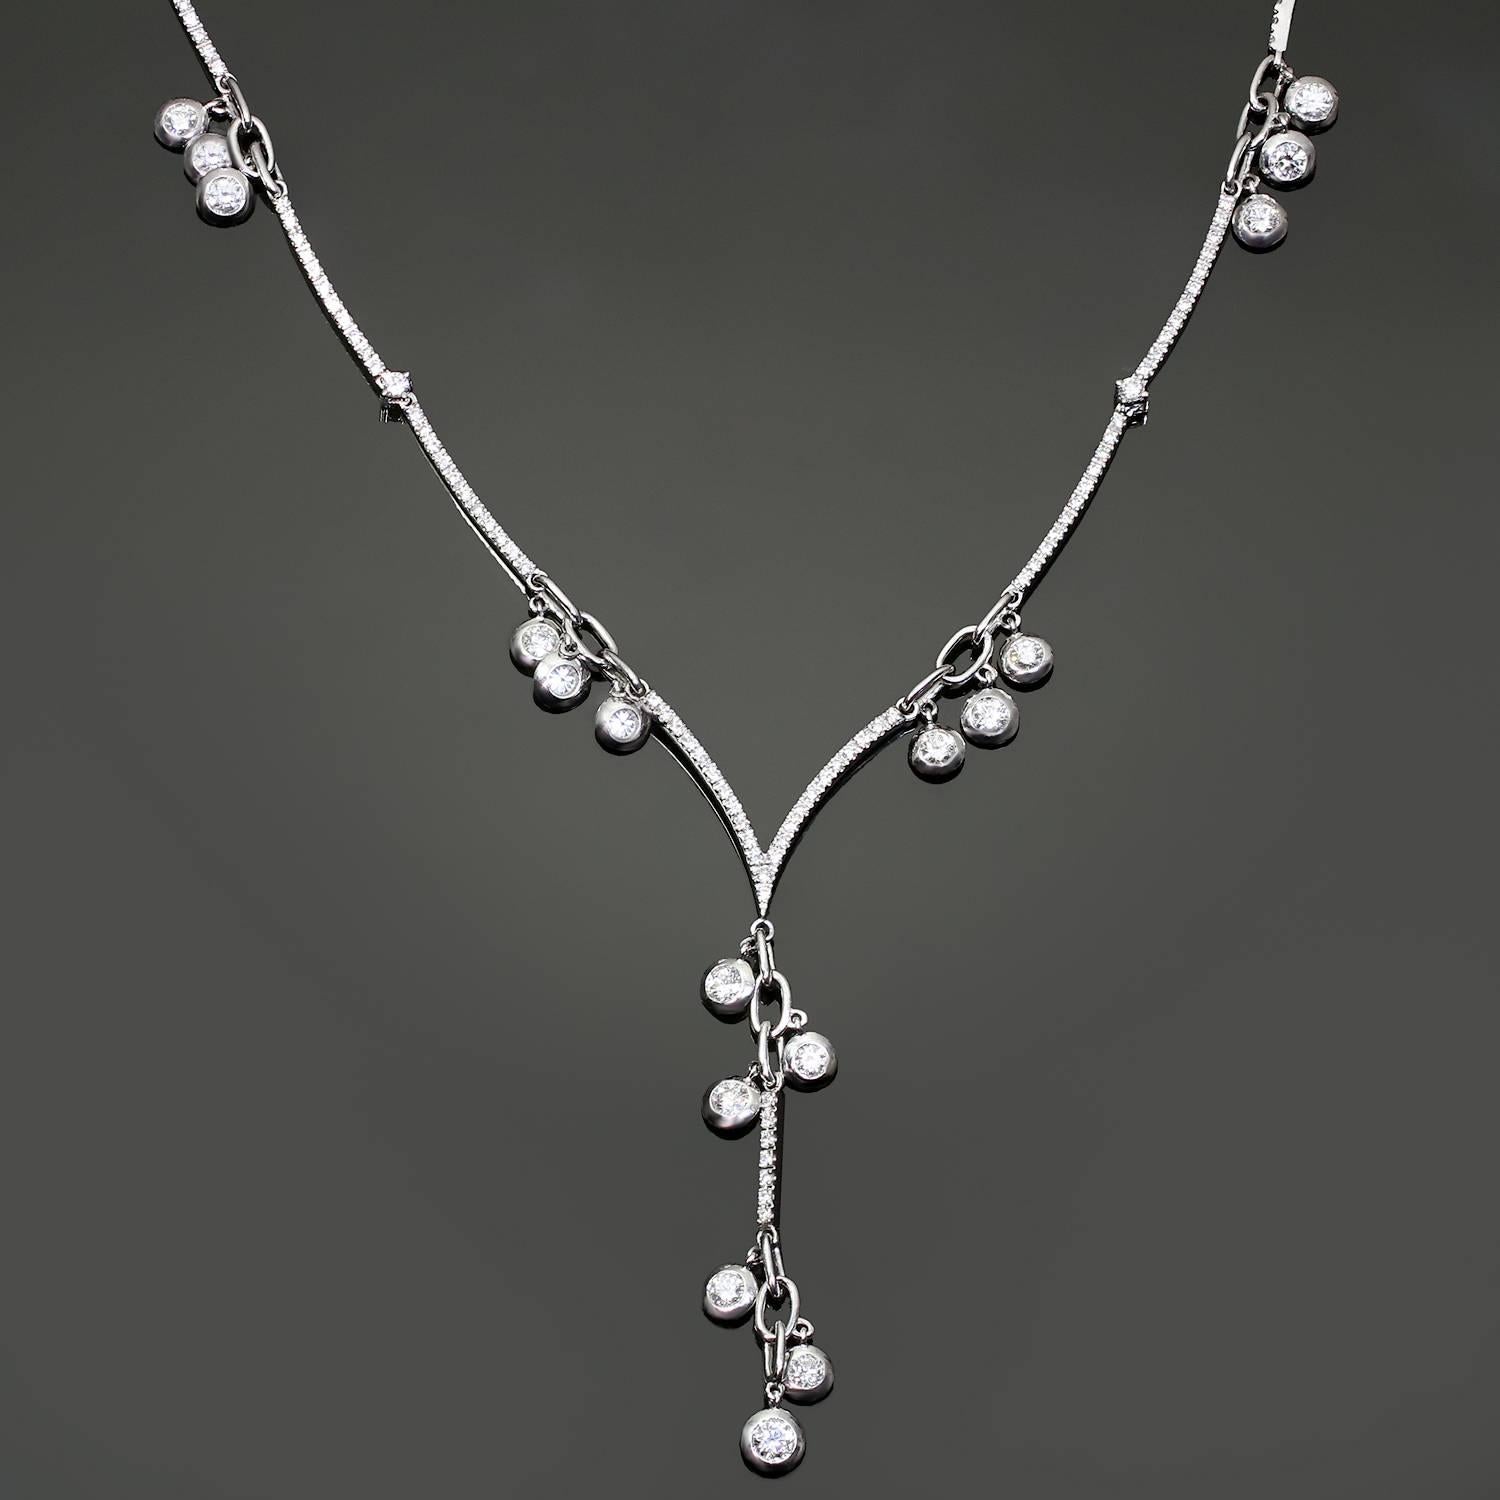 This magnificent Stefan Hafter chandelier lariat necklace is crafted in 18k white gold and set with brilliant-cut round diamonds of an estimated 2.77 carats. A delicate and timeless design made in Italy circa 2010s. Measurements: 17.5